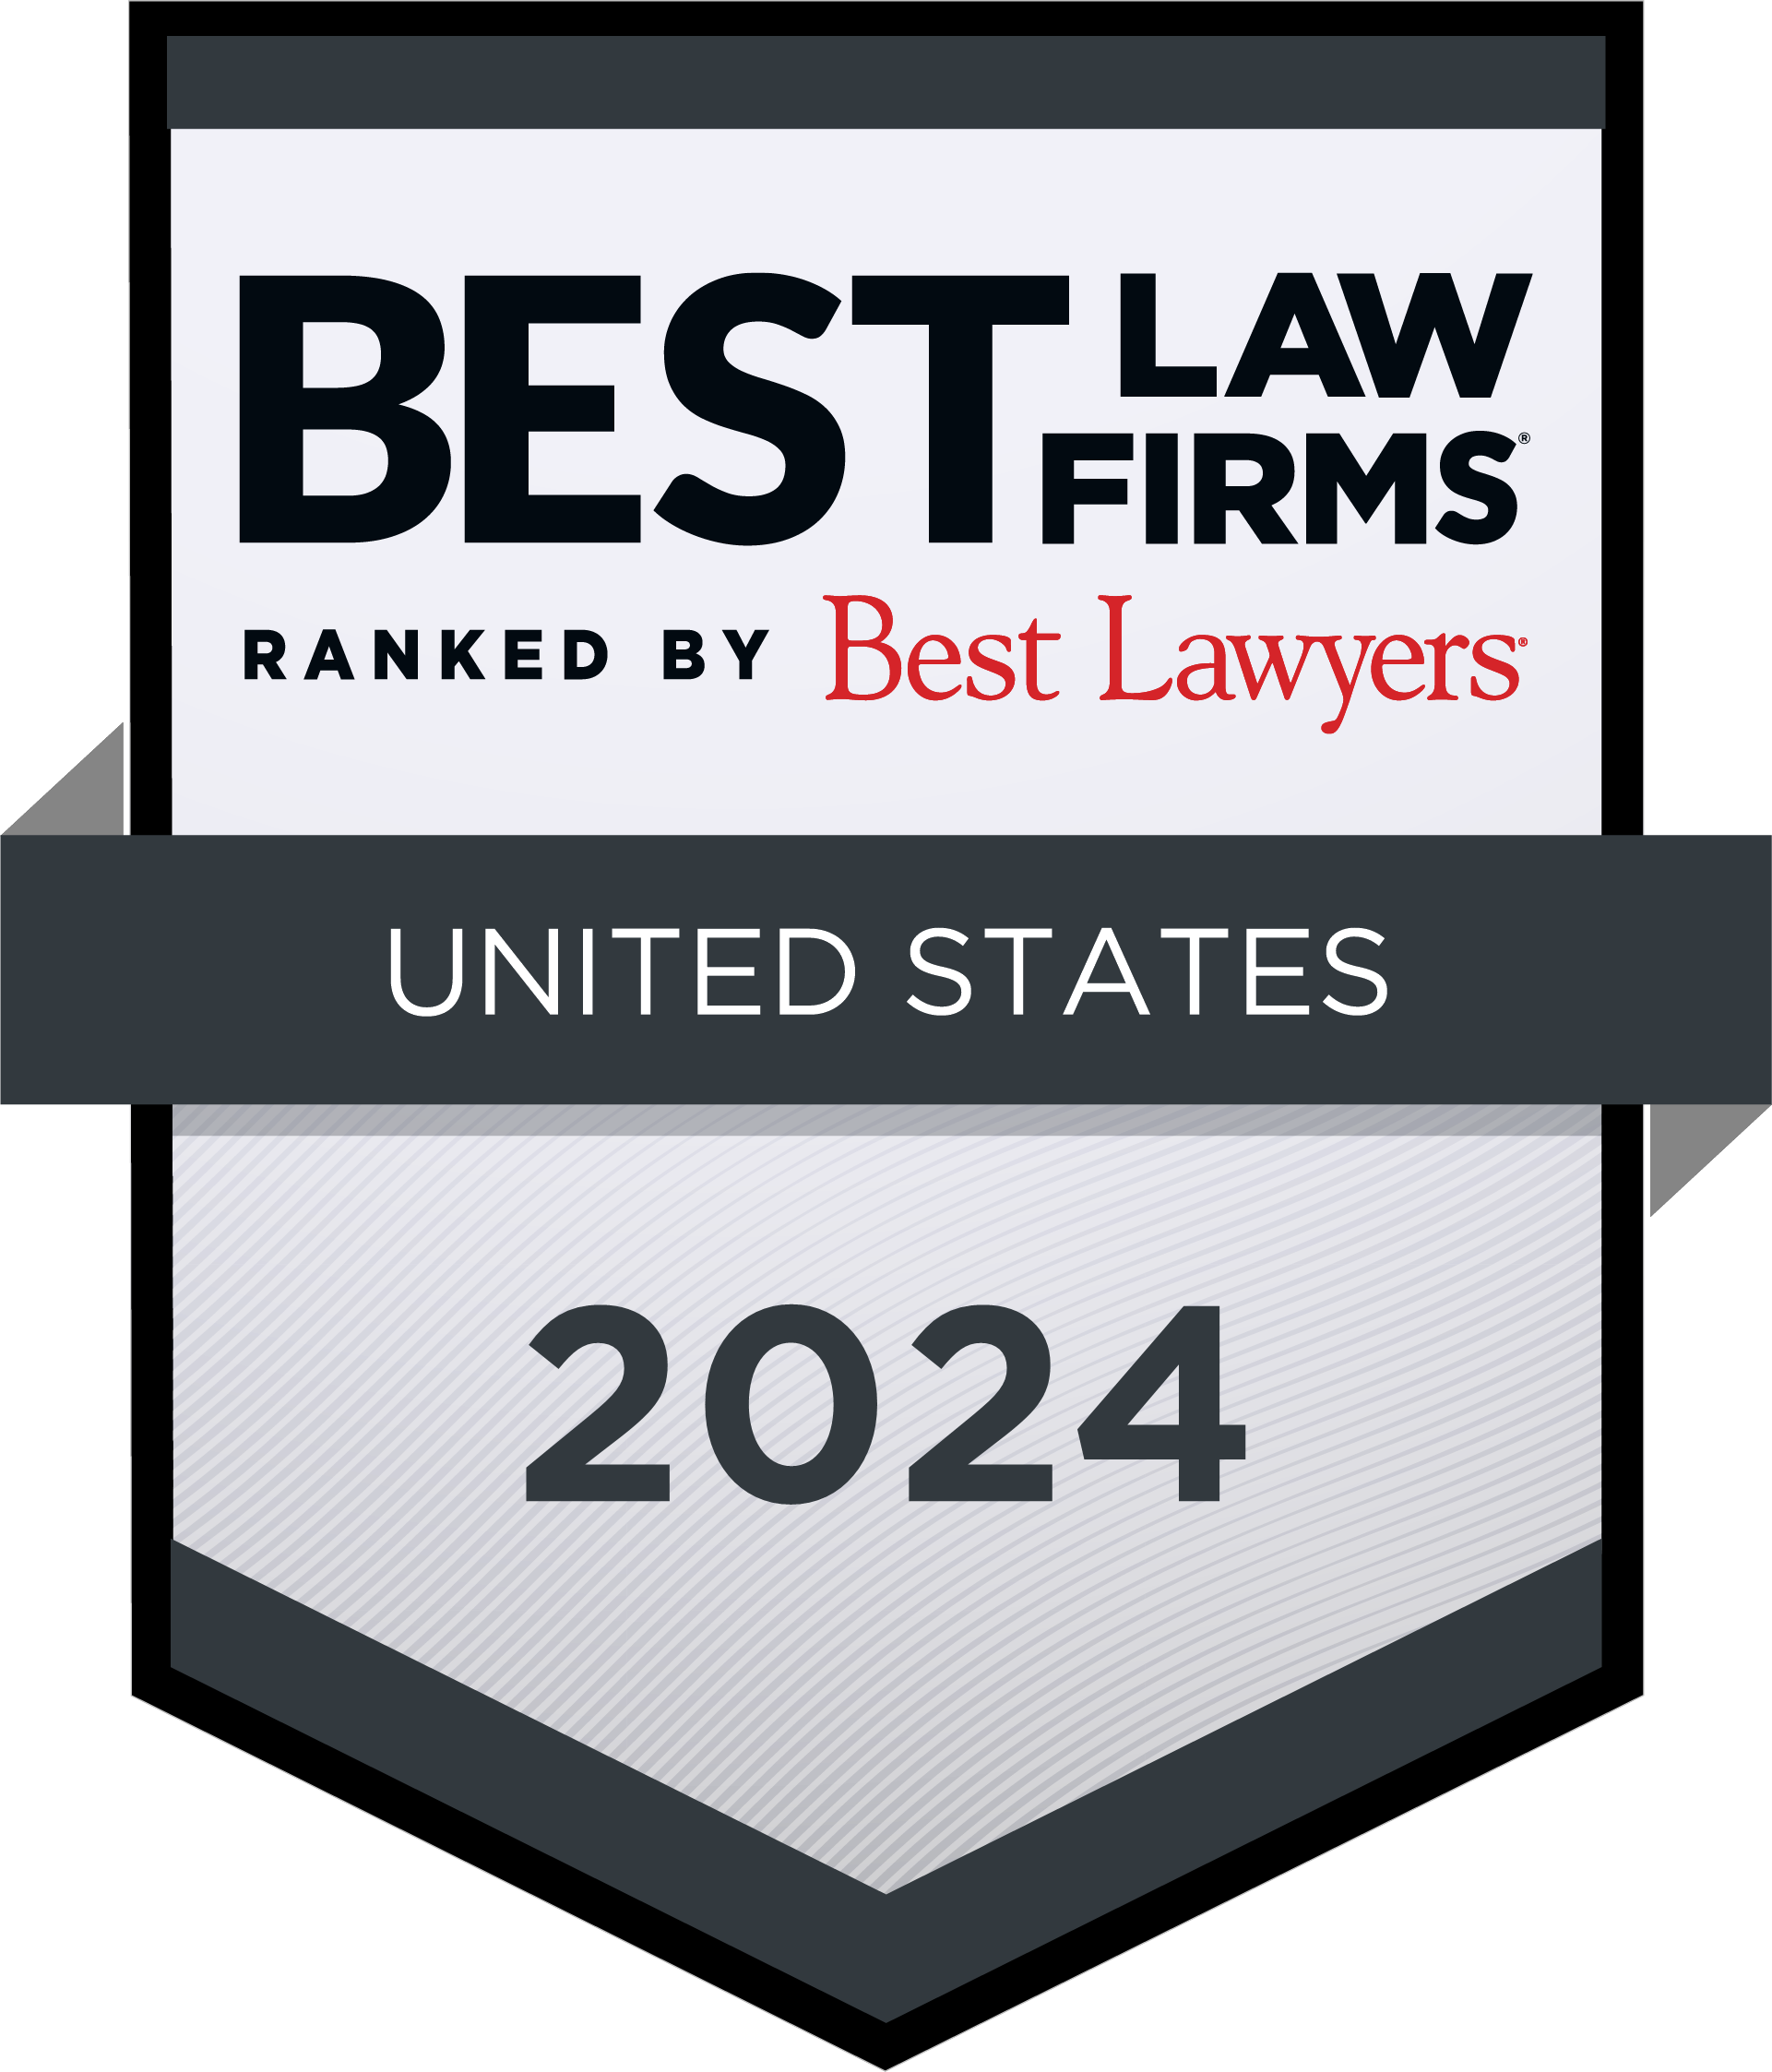 Wilentz Named to the 2024 “Best Law Firms” List by Best Lawyers